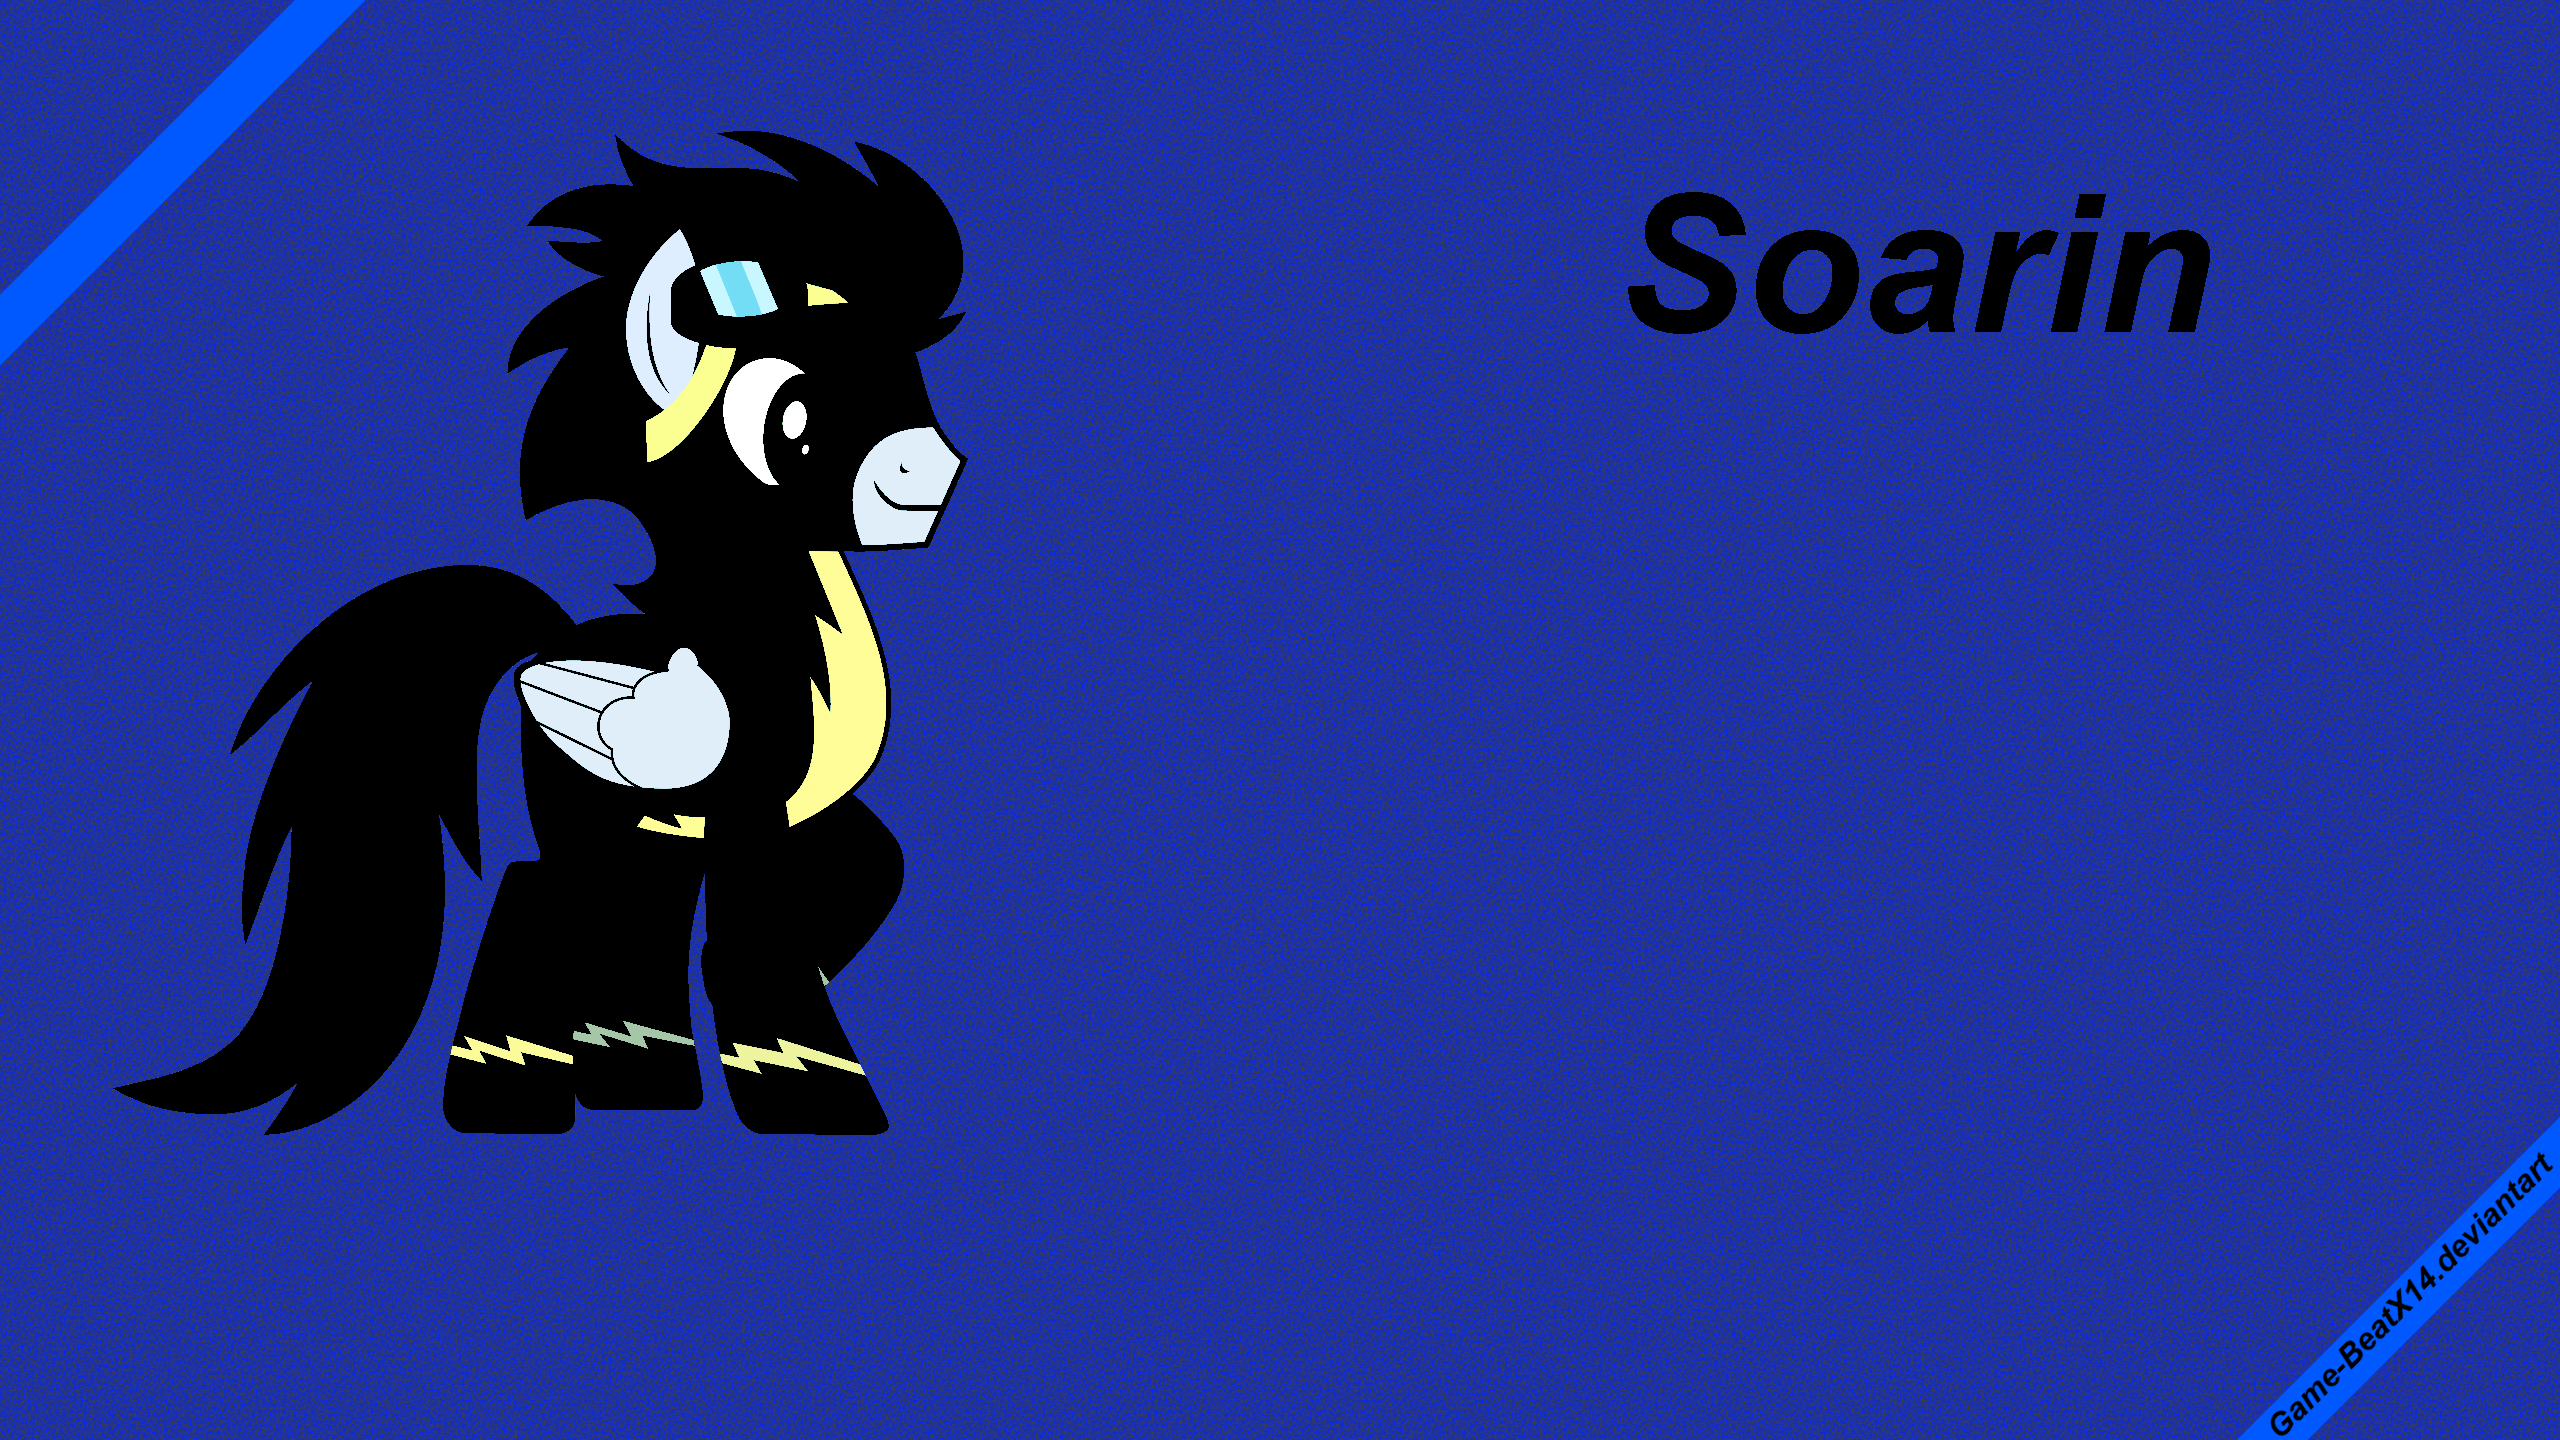 Soarin' Wallpaper by BaumkuchenPony and Game-BeatX14